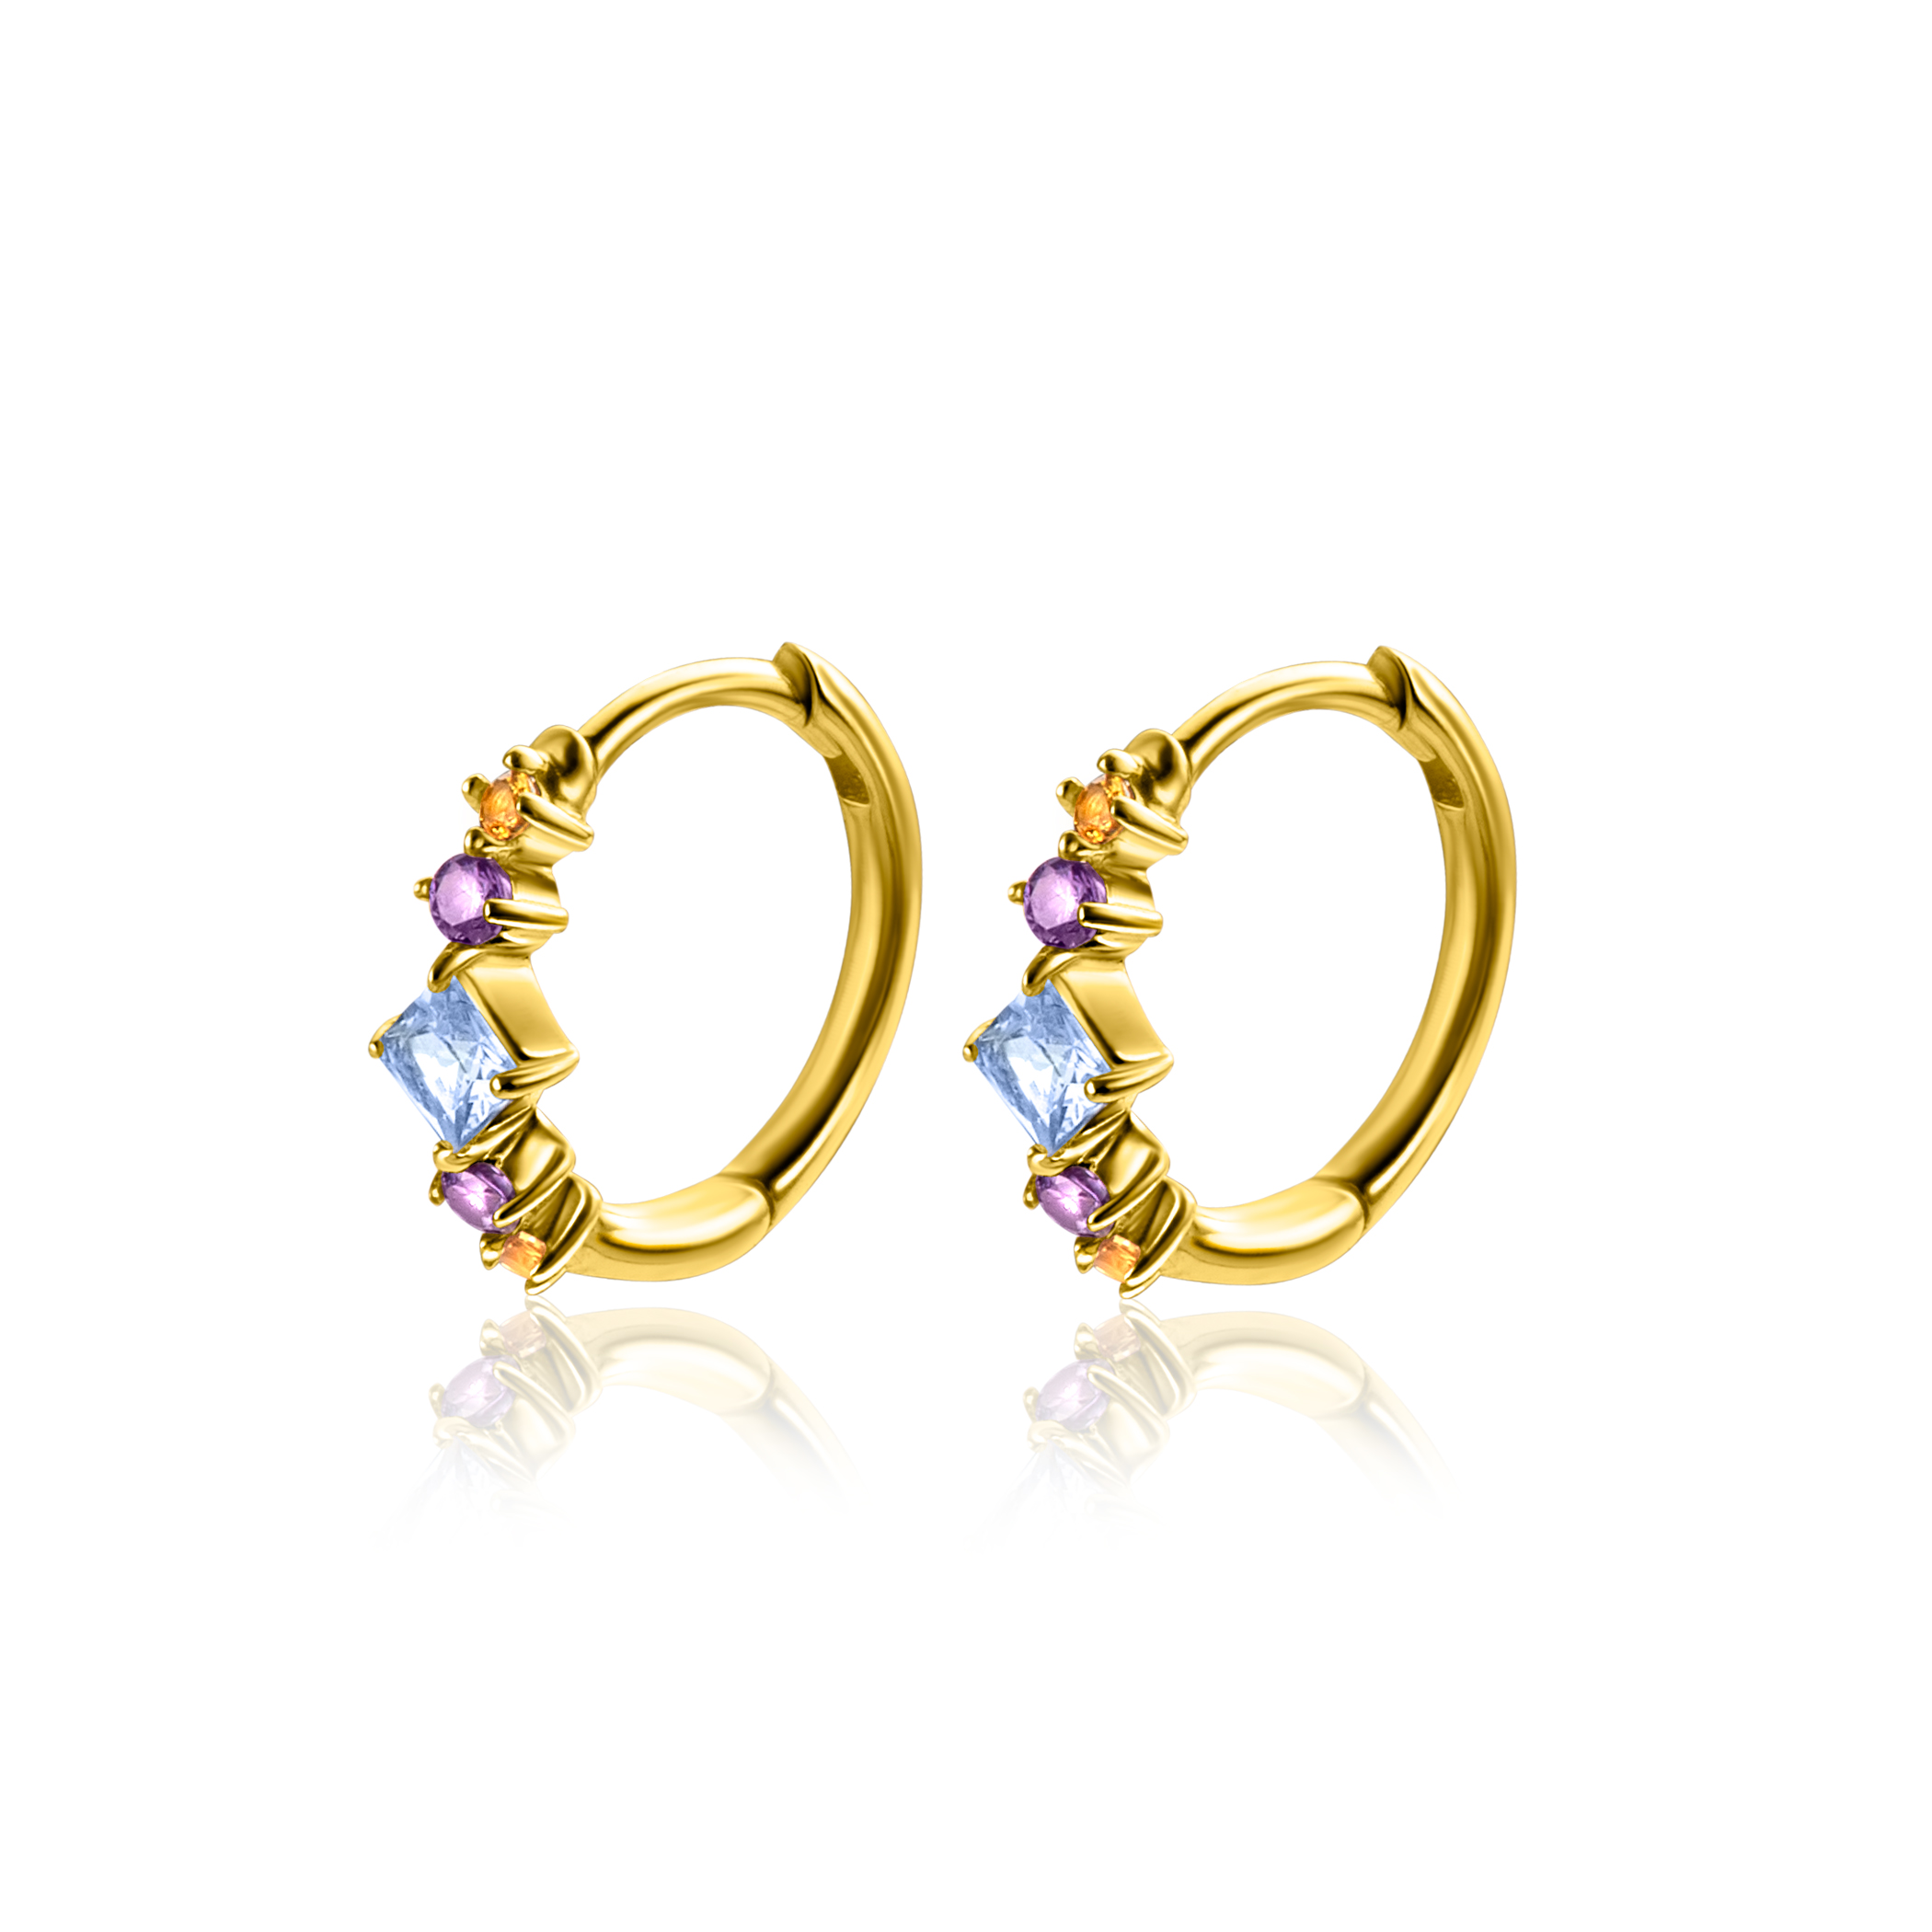 15mm ZINZI Gold Plated Sterling Silver Hoop Earrings with Blue, Purple and Champagne Color Stones in Diamond Shape 15x2mm ZIO2443